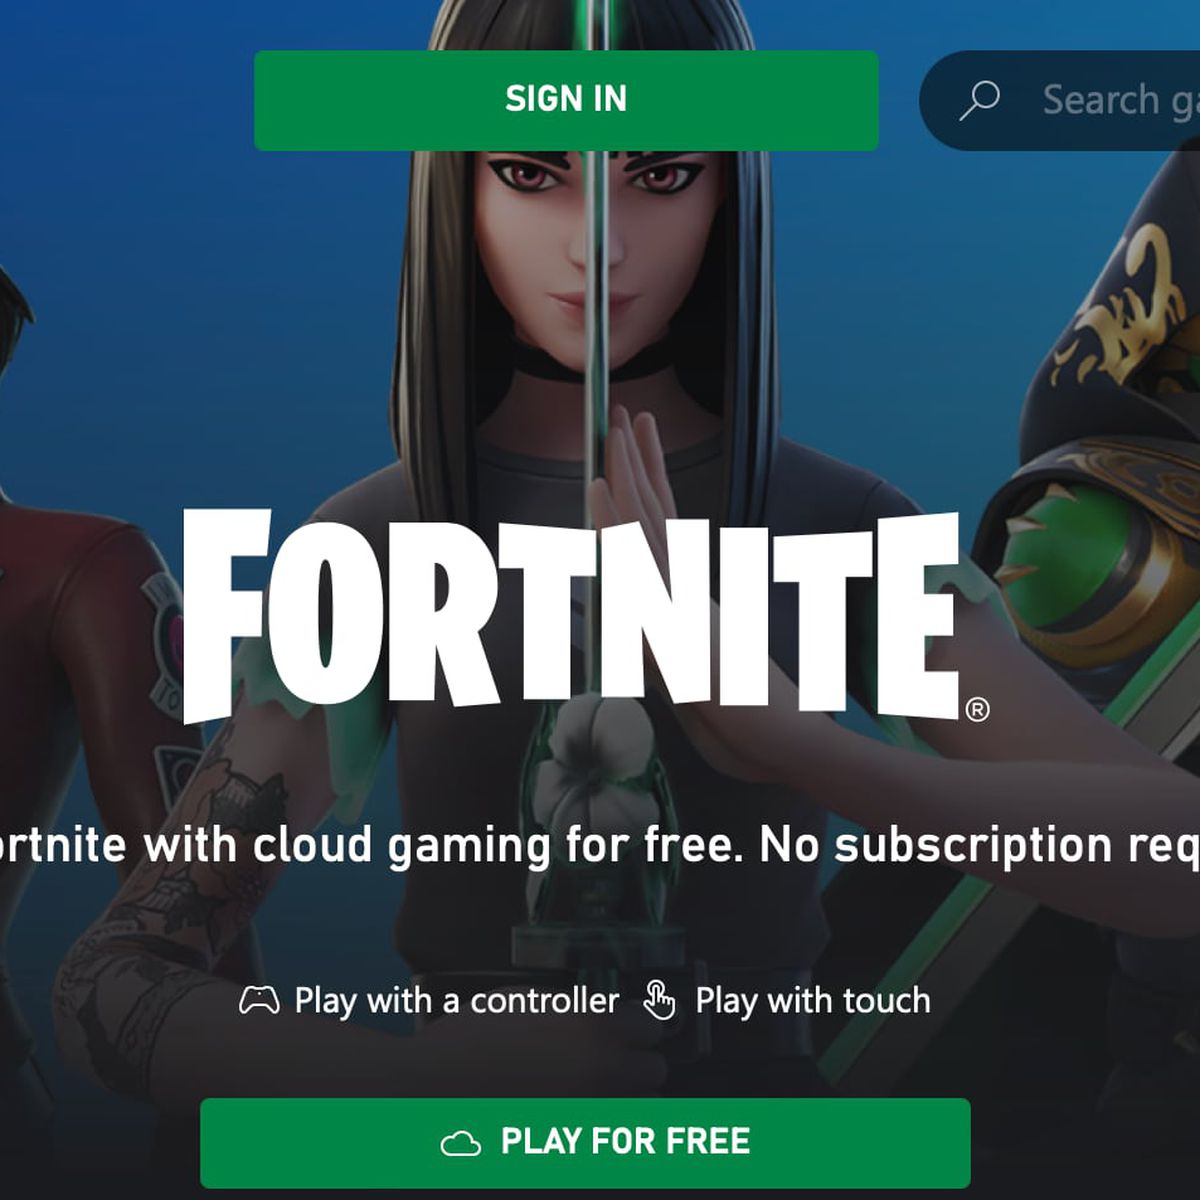 Fortnite Comes to iPhones and iPads Through Xbox Cloud Gaming